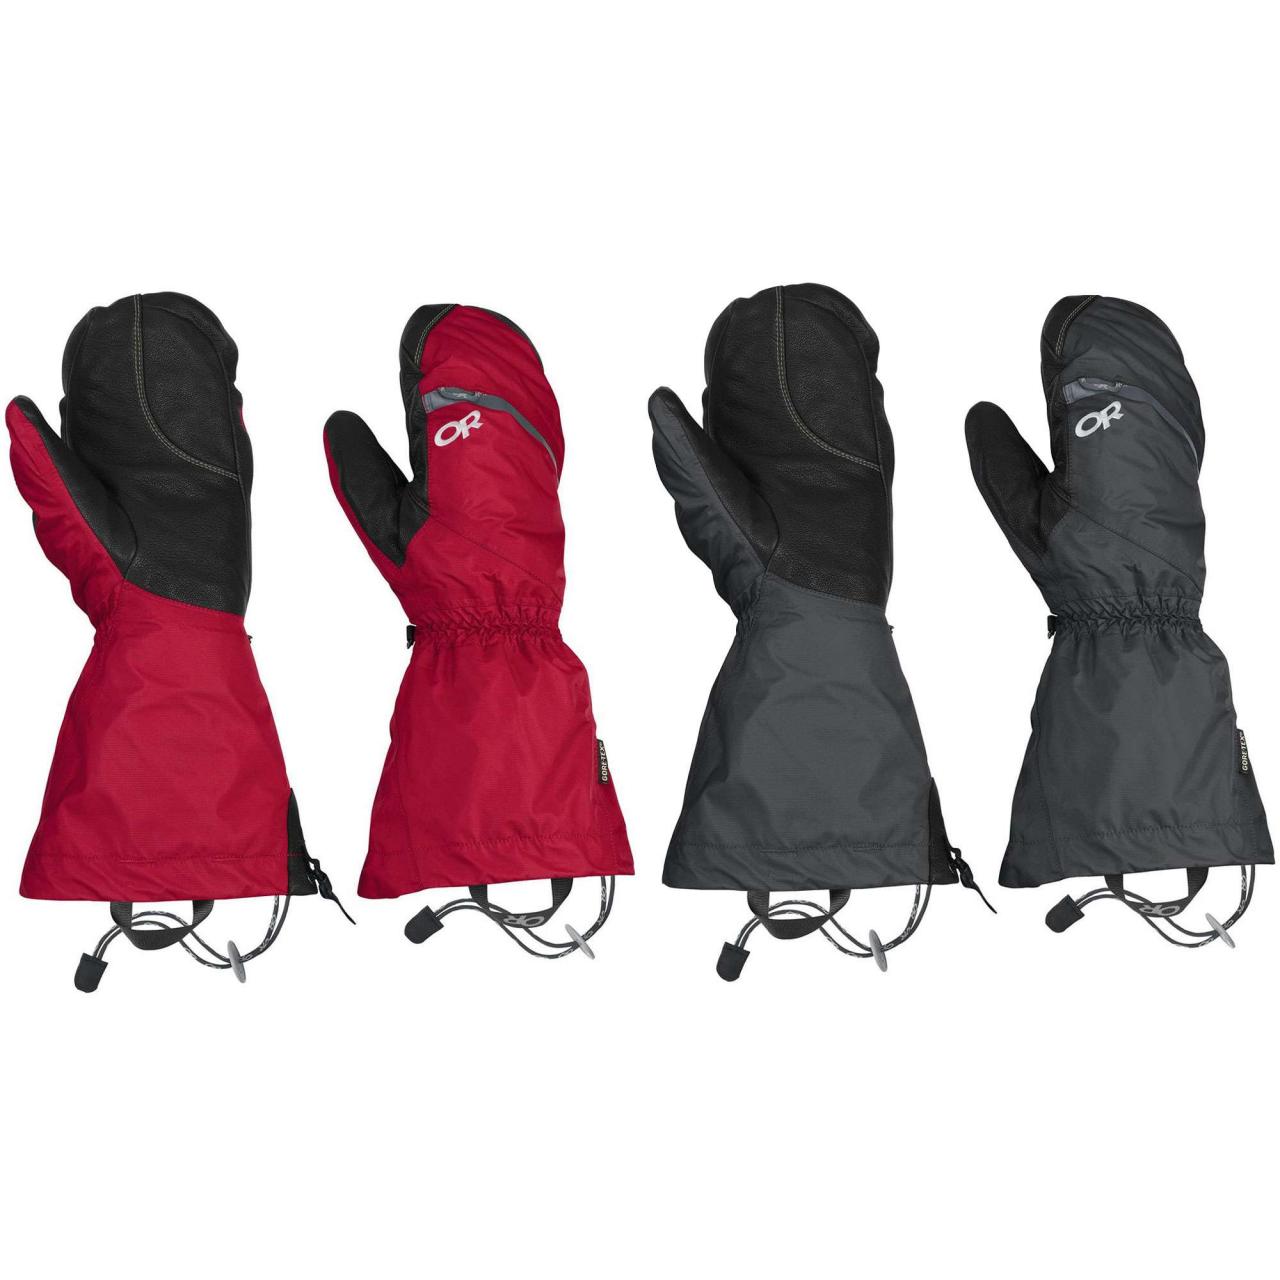 Outdoor Research Men's Alti Mitts | Outdoorplay